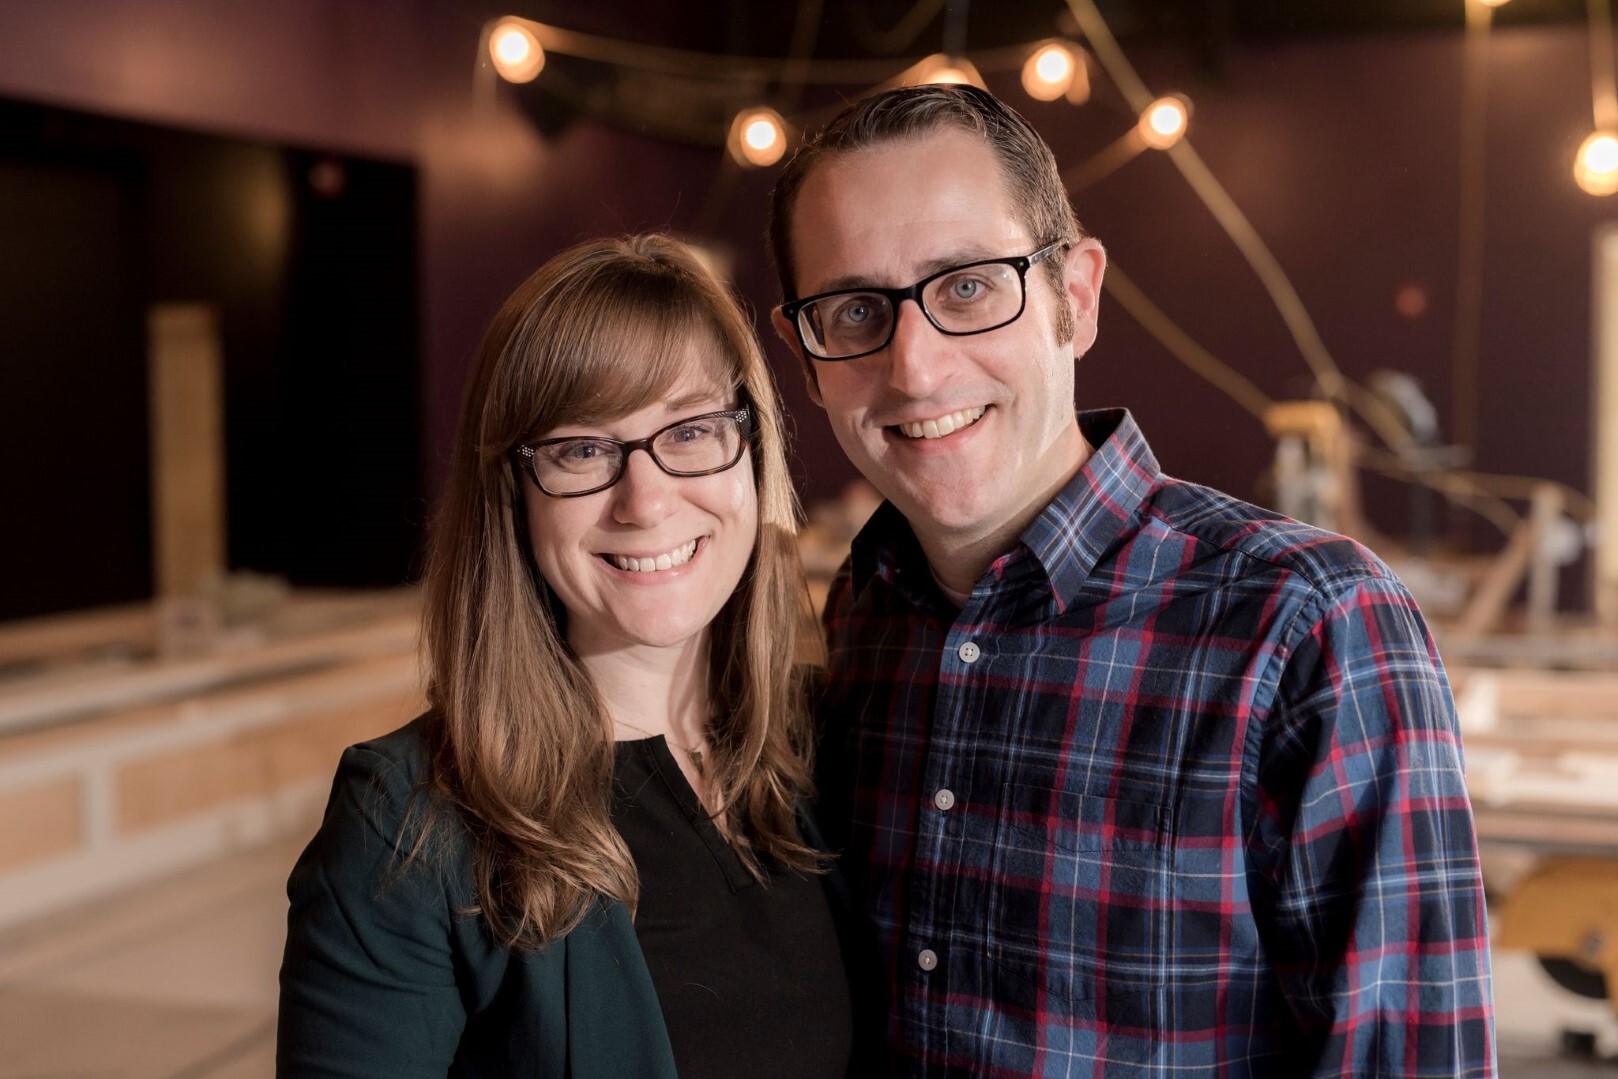 Pictured: Natalie Miller and Nathan Hartswick, owners of the Vermont Comedy Club